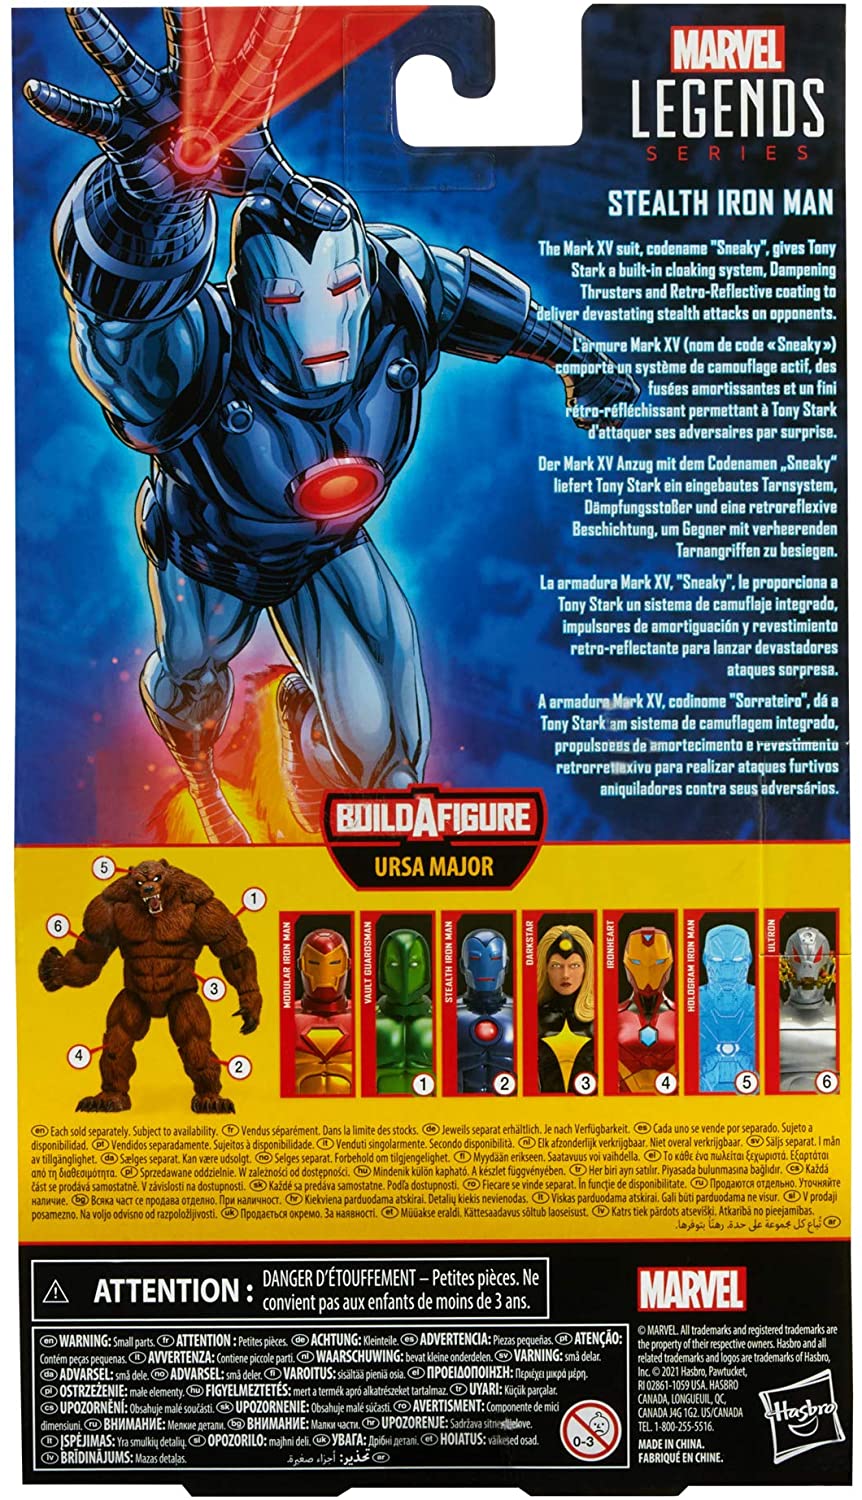 Hasbro Marvel Legends Series 6-inch Stealth Iron Man Action Figure Toy, Includes 5 Accessories and 1 Build-A-Figure Part, Premium Design and Articulation Multicolor, F0357